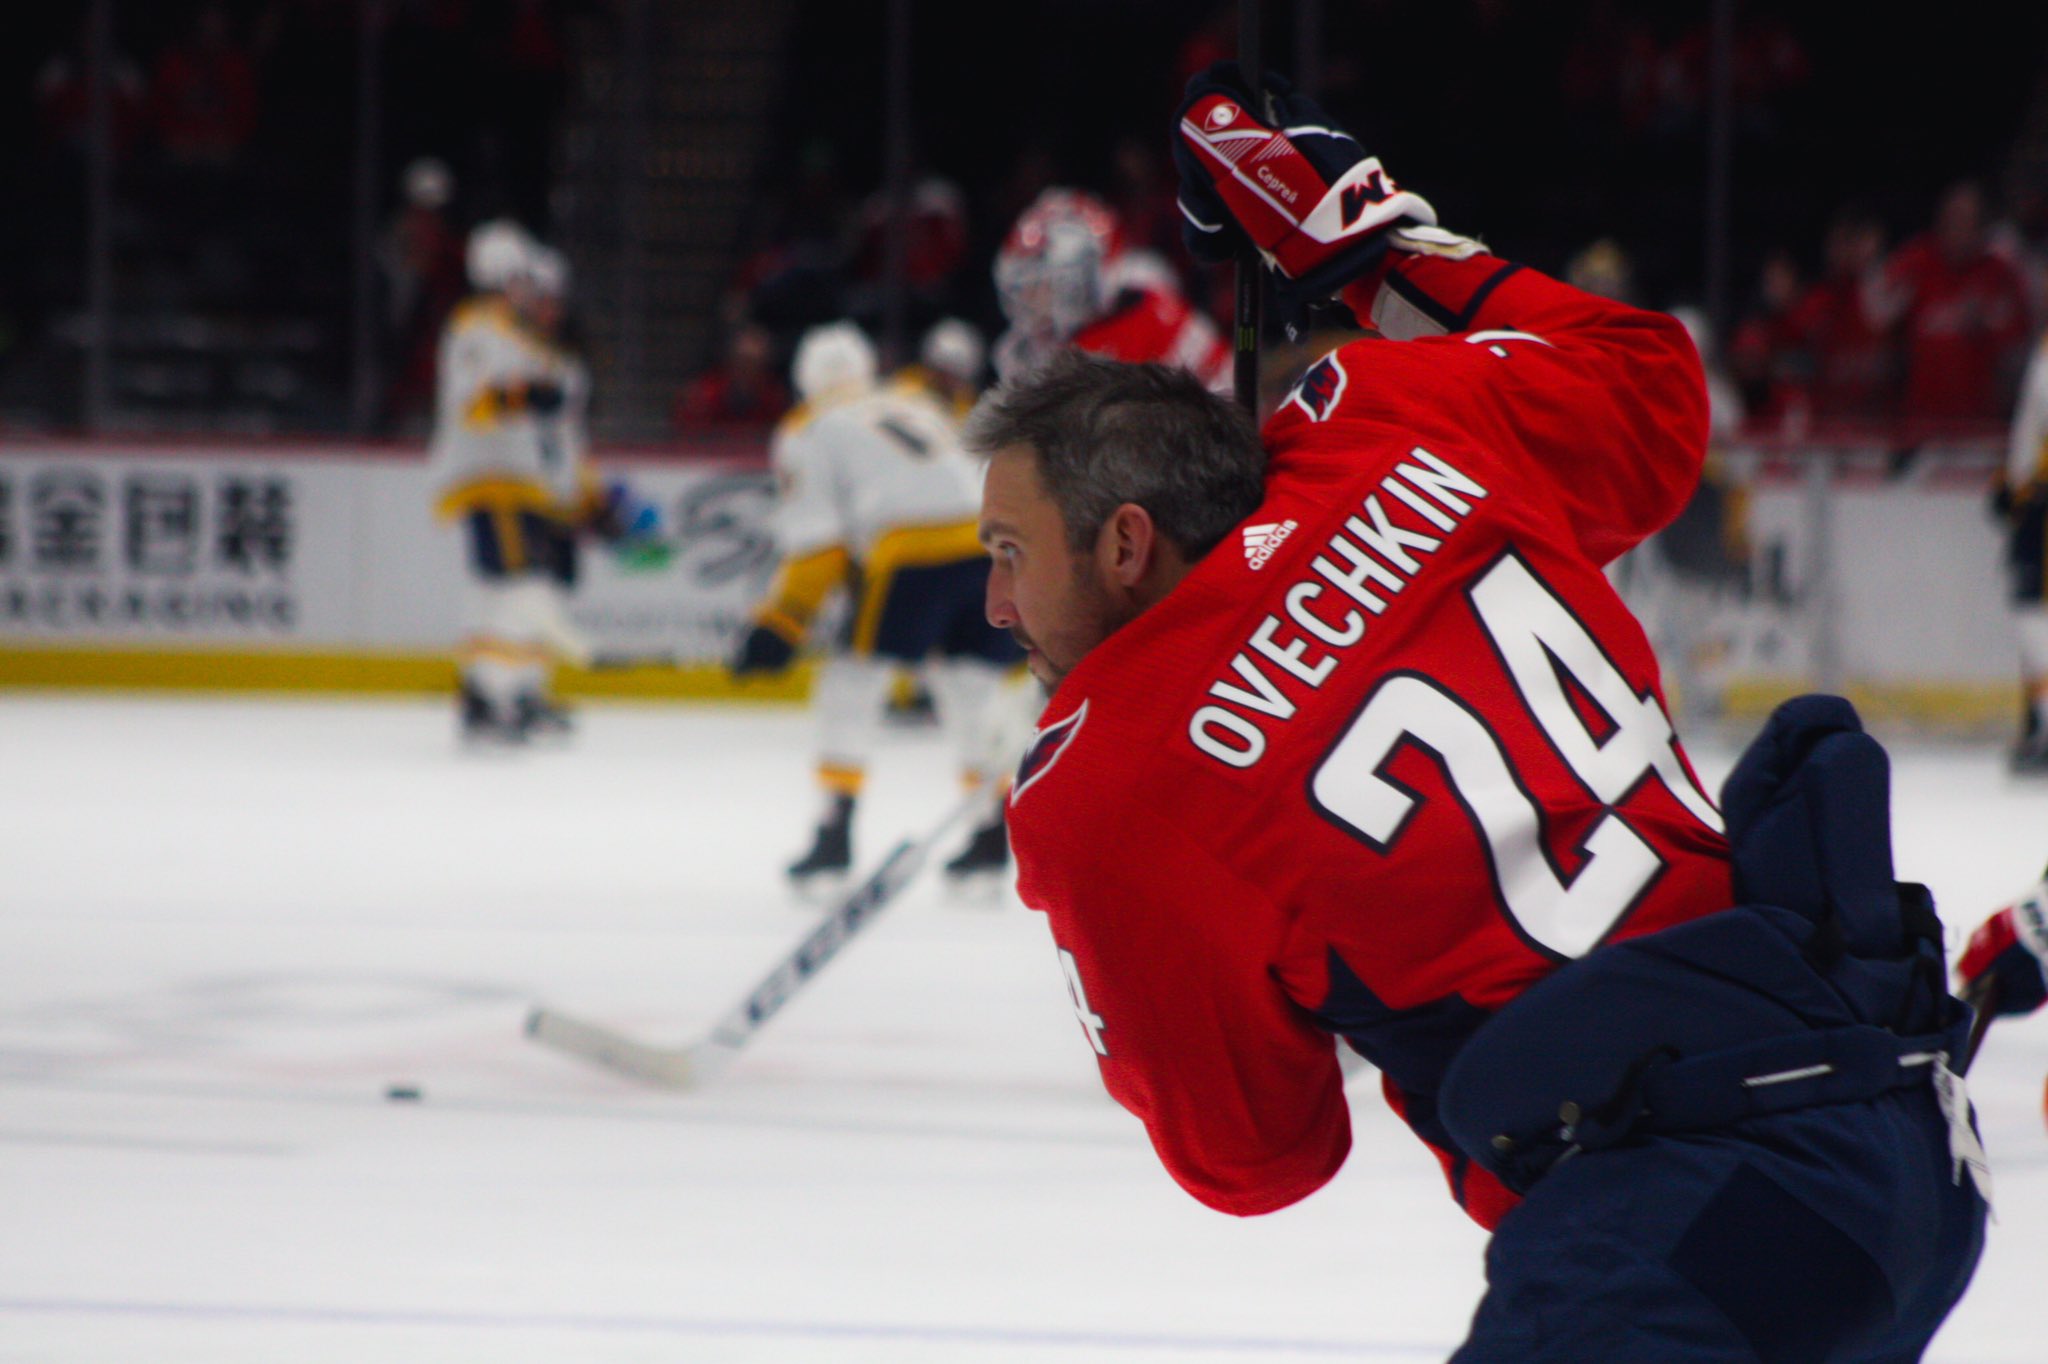 Alex Ovechkin honors Kobe Bryant by wearing No. 24 jersey before